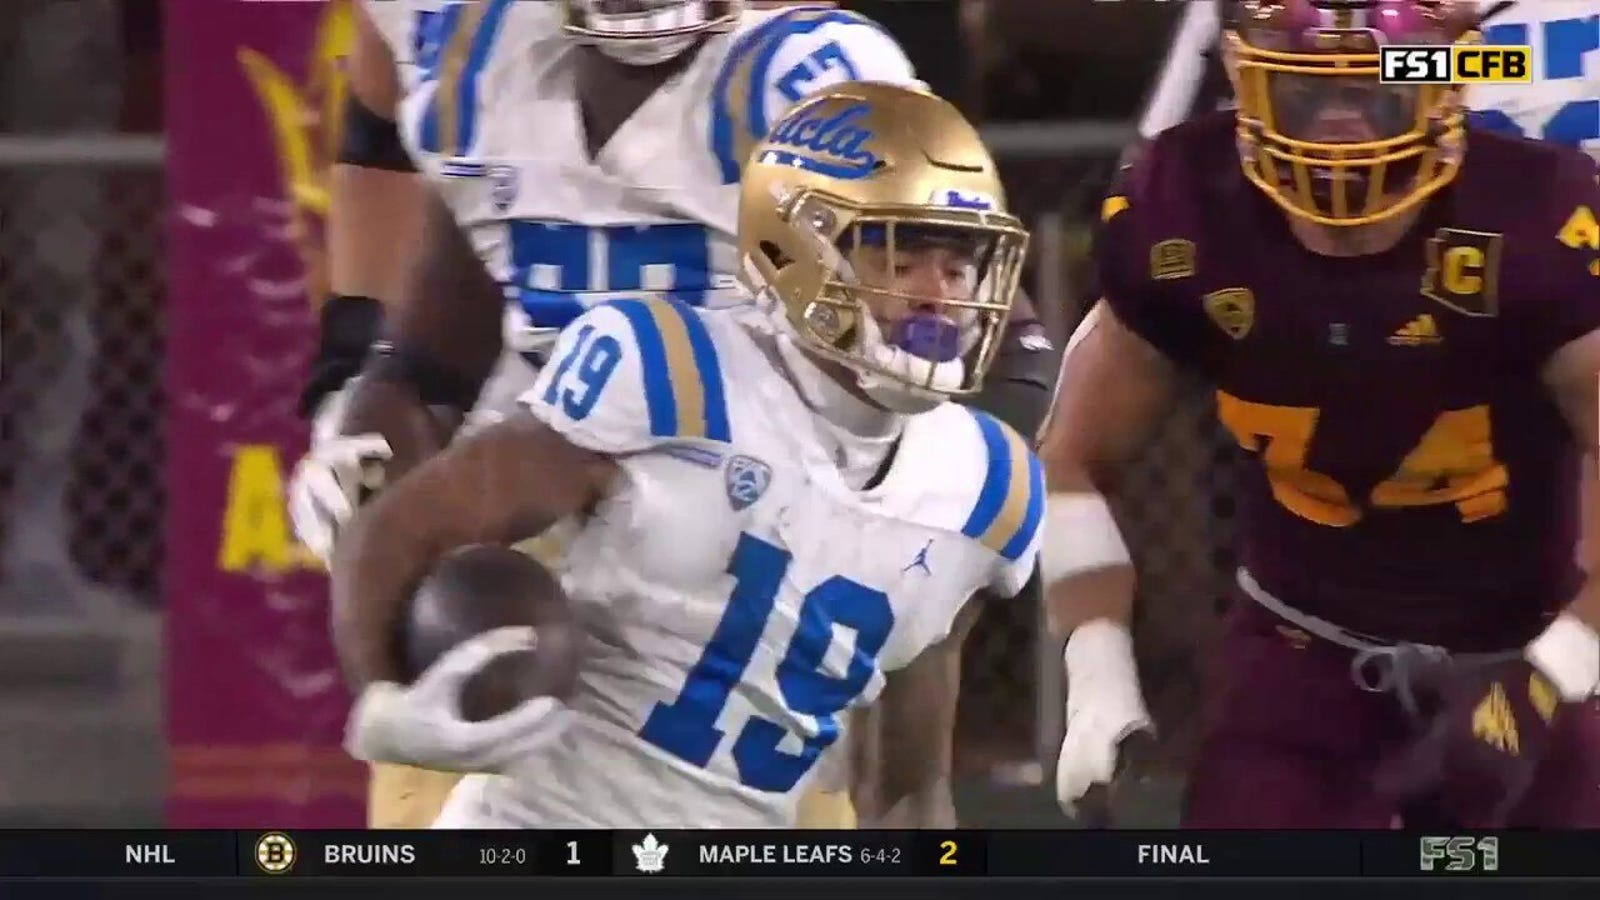 UCLA's Kazmeir Allen shows off elite speed with this 75-yard rushing TD.